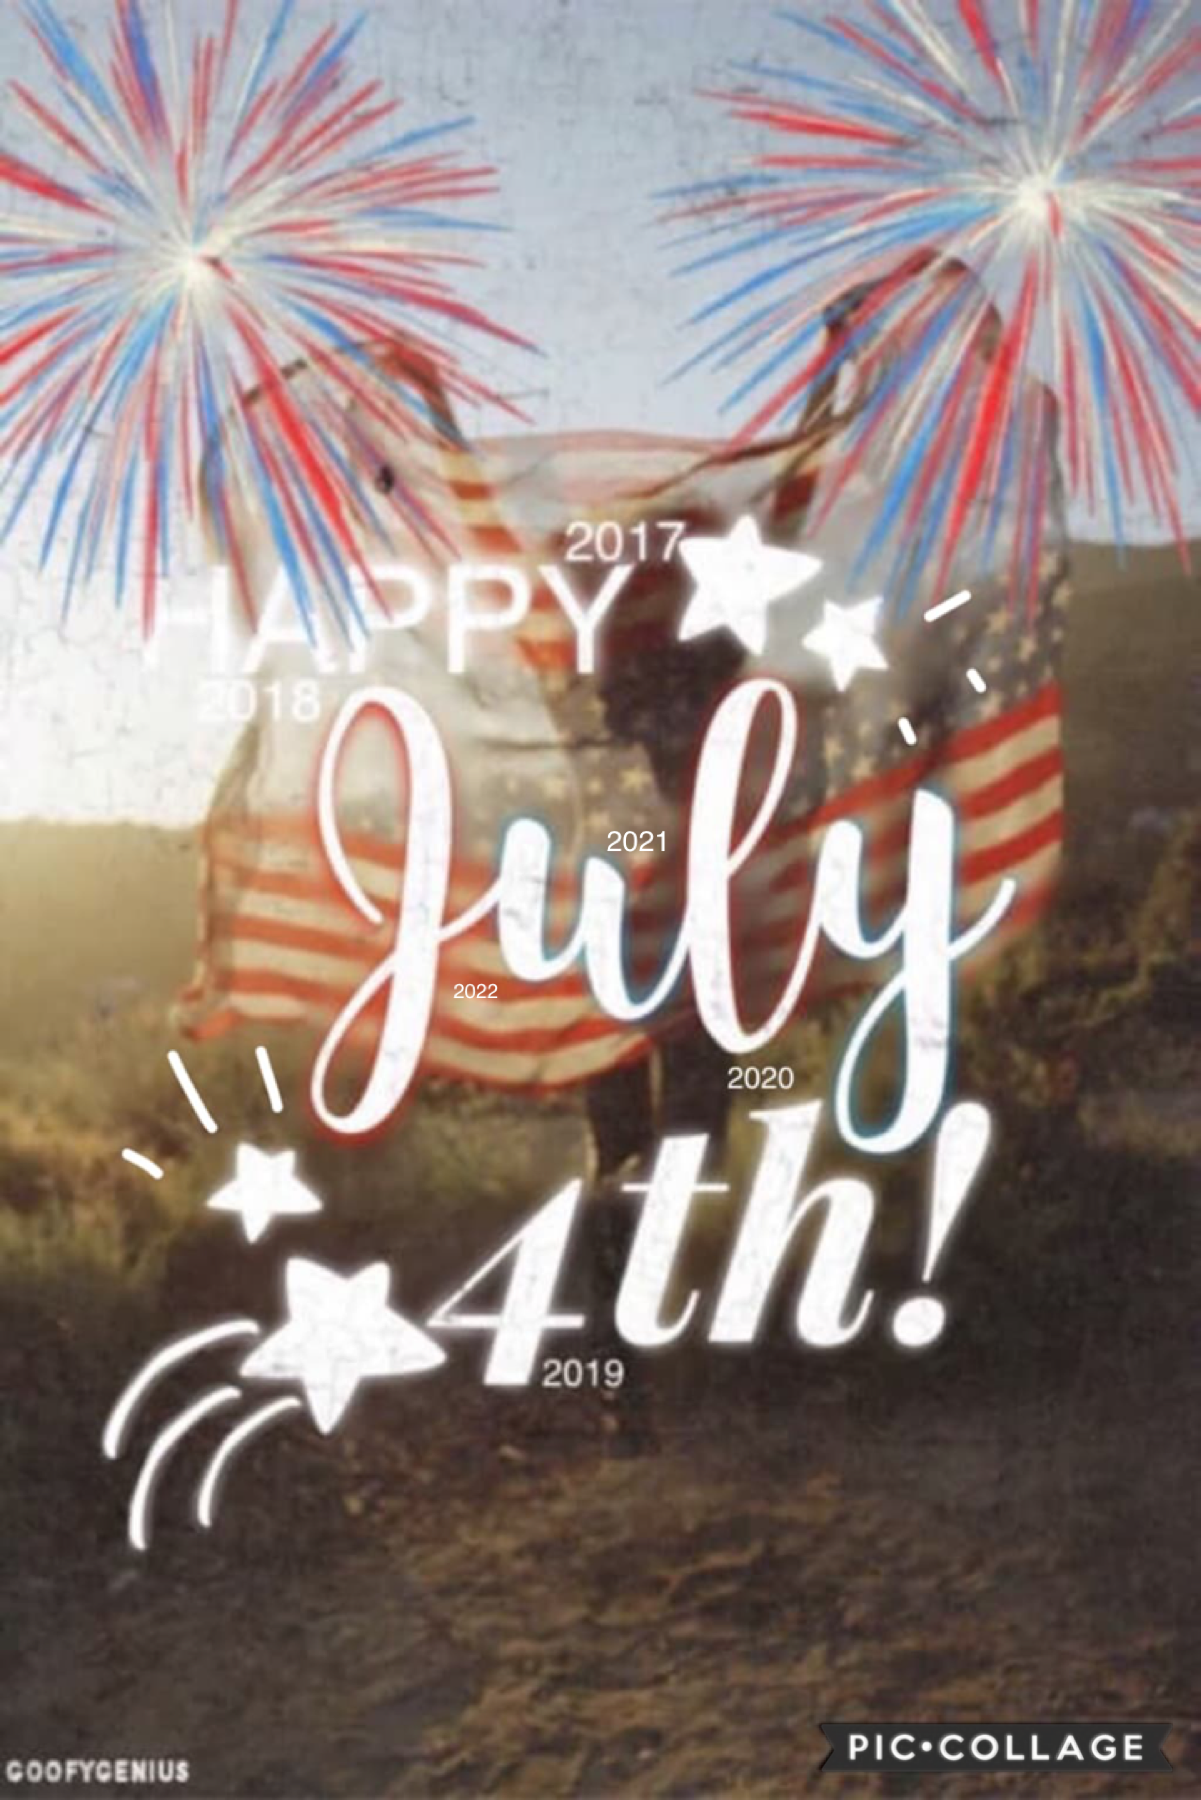 🇺🇸Tap Here🇺🇸
Despite everything, I am an American citizen, so I will still post my annual July fourth post. Hope everyone is doing alright :) 